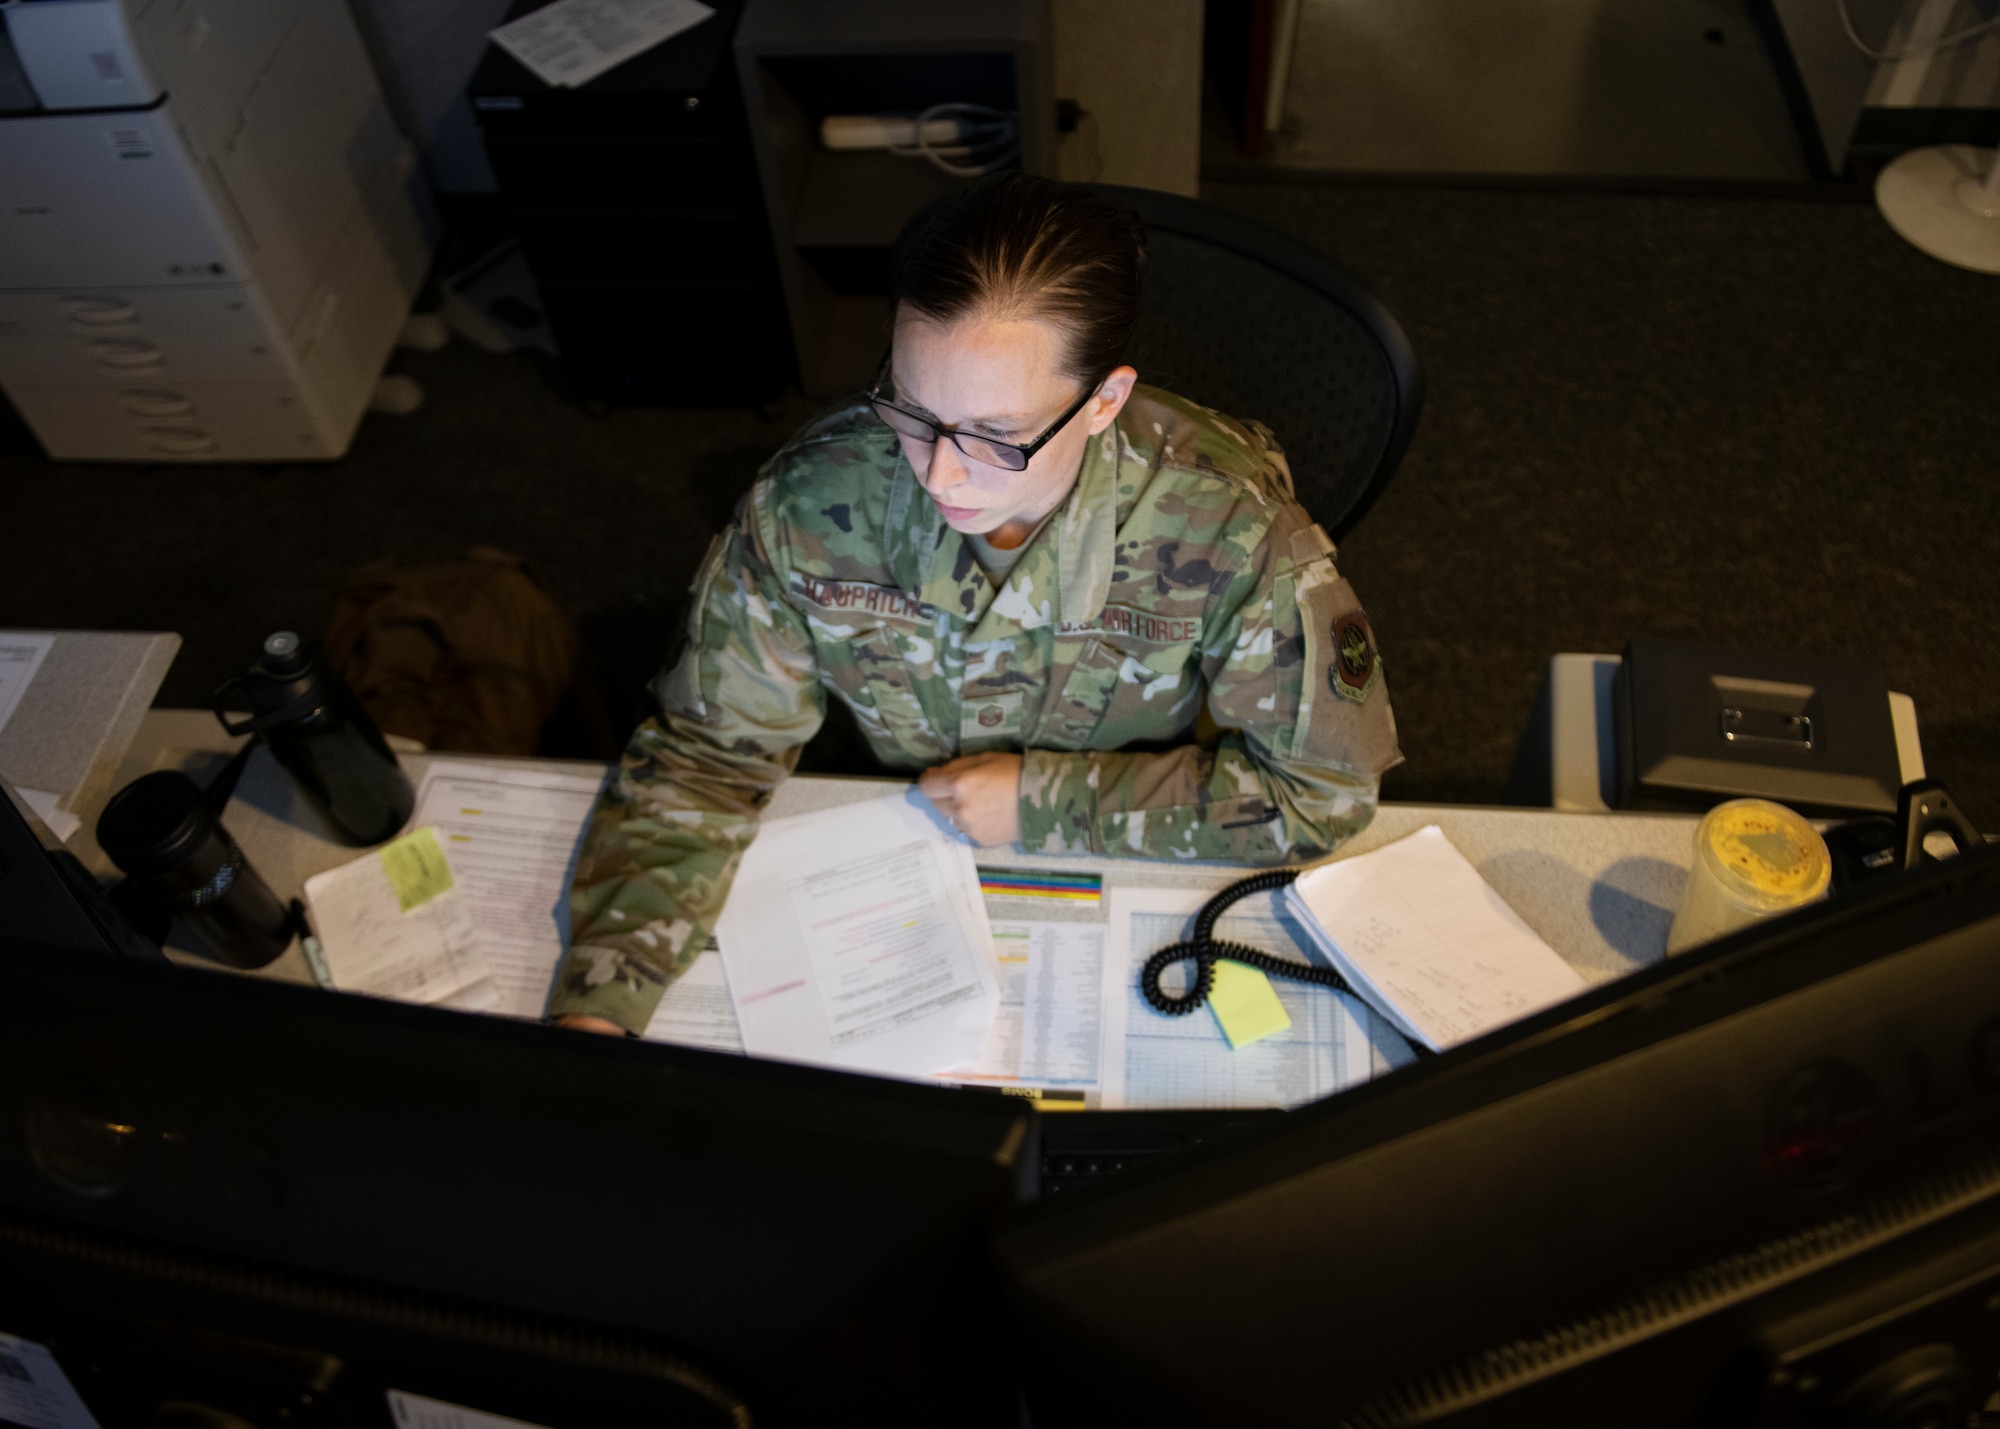 U.S. Air Force Master Sgt. Elizabeth Hauprich, 60th Air Mobility Wing Command Post noncommissioned officer in charge of command and control operations, monitors information on her computer console Sept. 17, 2020, at Travis Air Force Base, California.